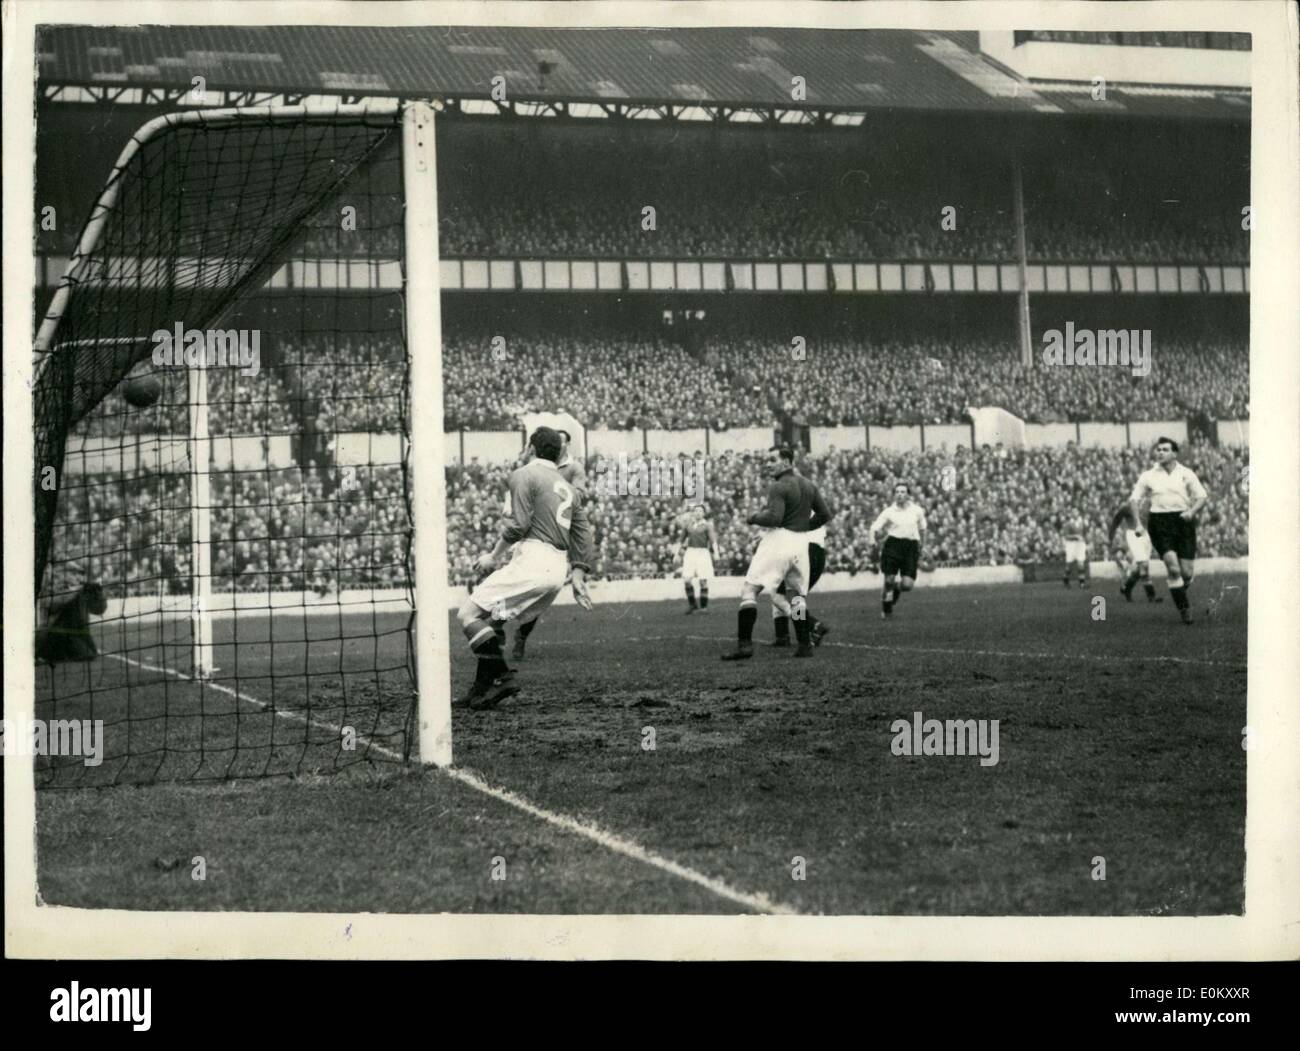 Nov. 01, 1952 - Spurs versus Manchester united Walters scores for Tottenham. Photo shows Walters the spurs outside right (on extreme right) headed this first goal for spurs - watched by crompton the Manchester Goalkeeper, and Monulty the Manchester right back at white hart lane this afternoon. Stock Photo